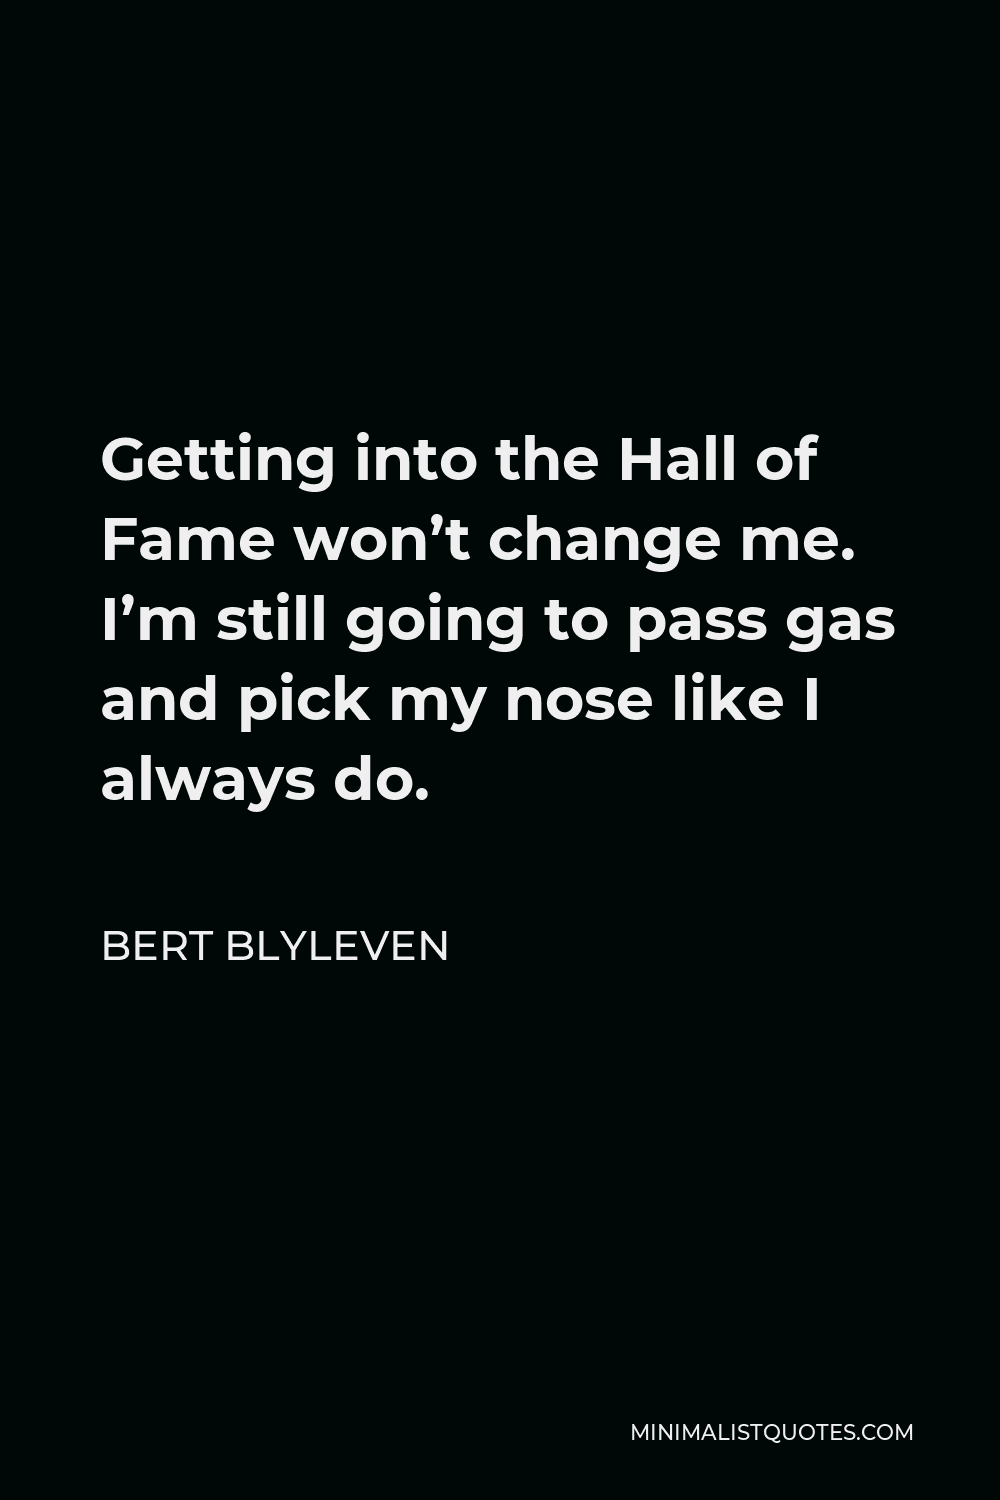 Bert Blyleven Quote - Getting into the Hall of Fame won’t change me. I’m still going to pass gas and pick my nose like I always do.